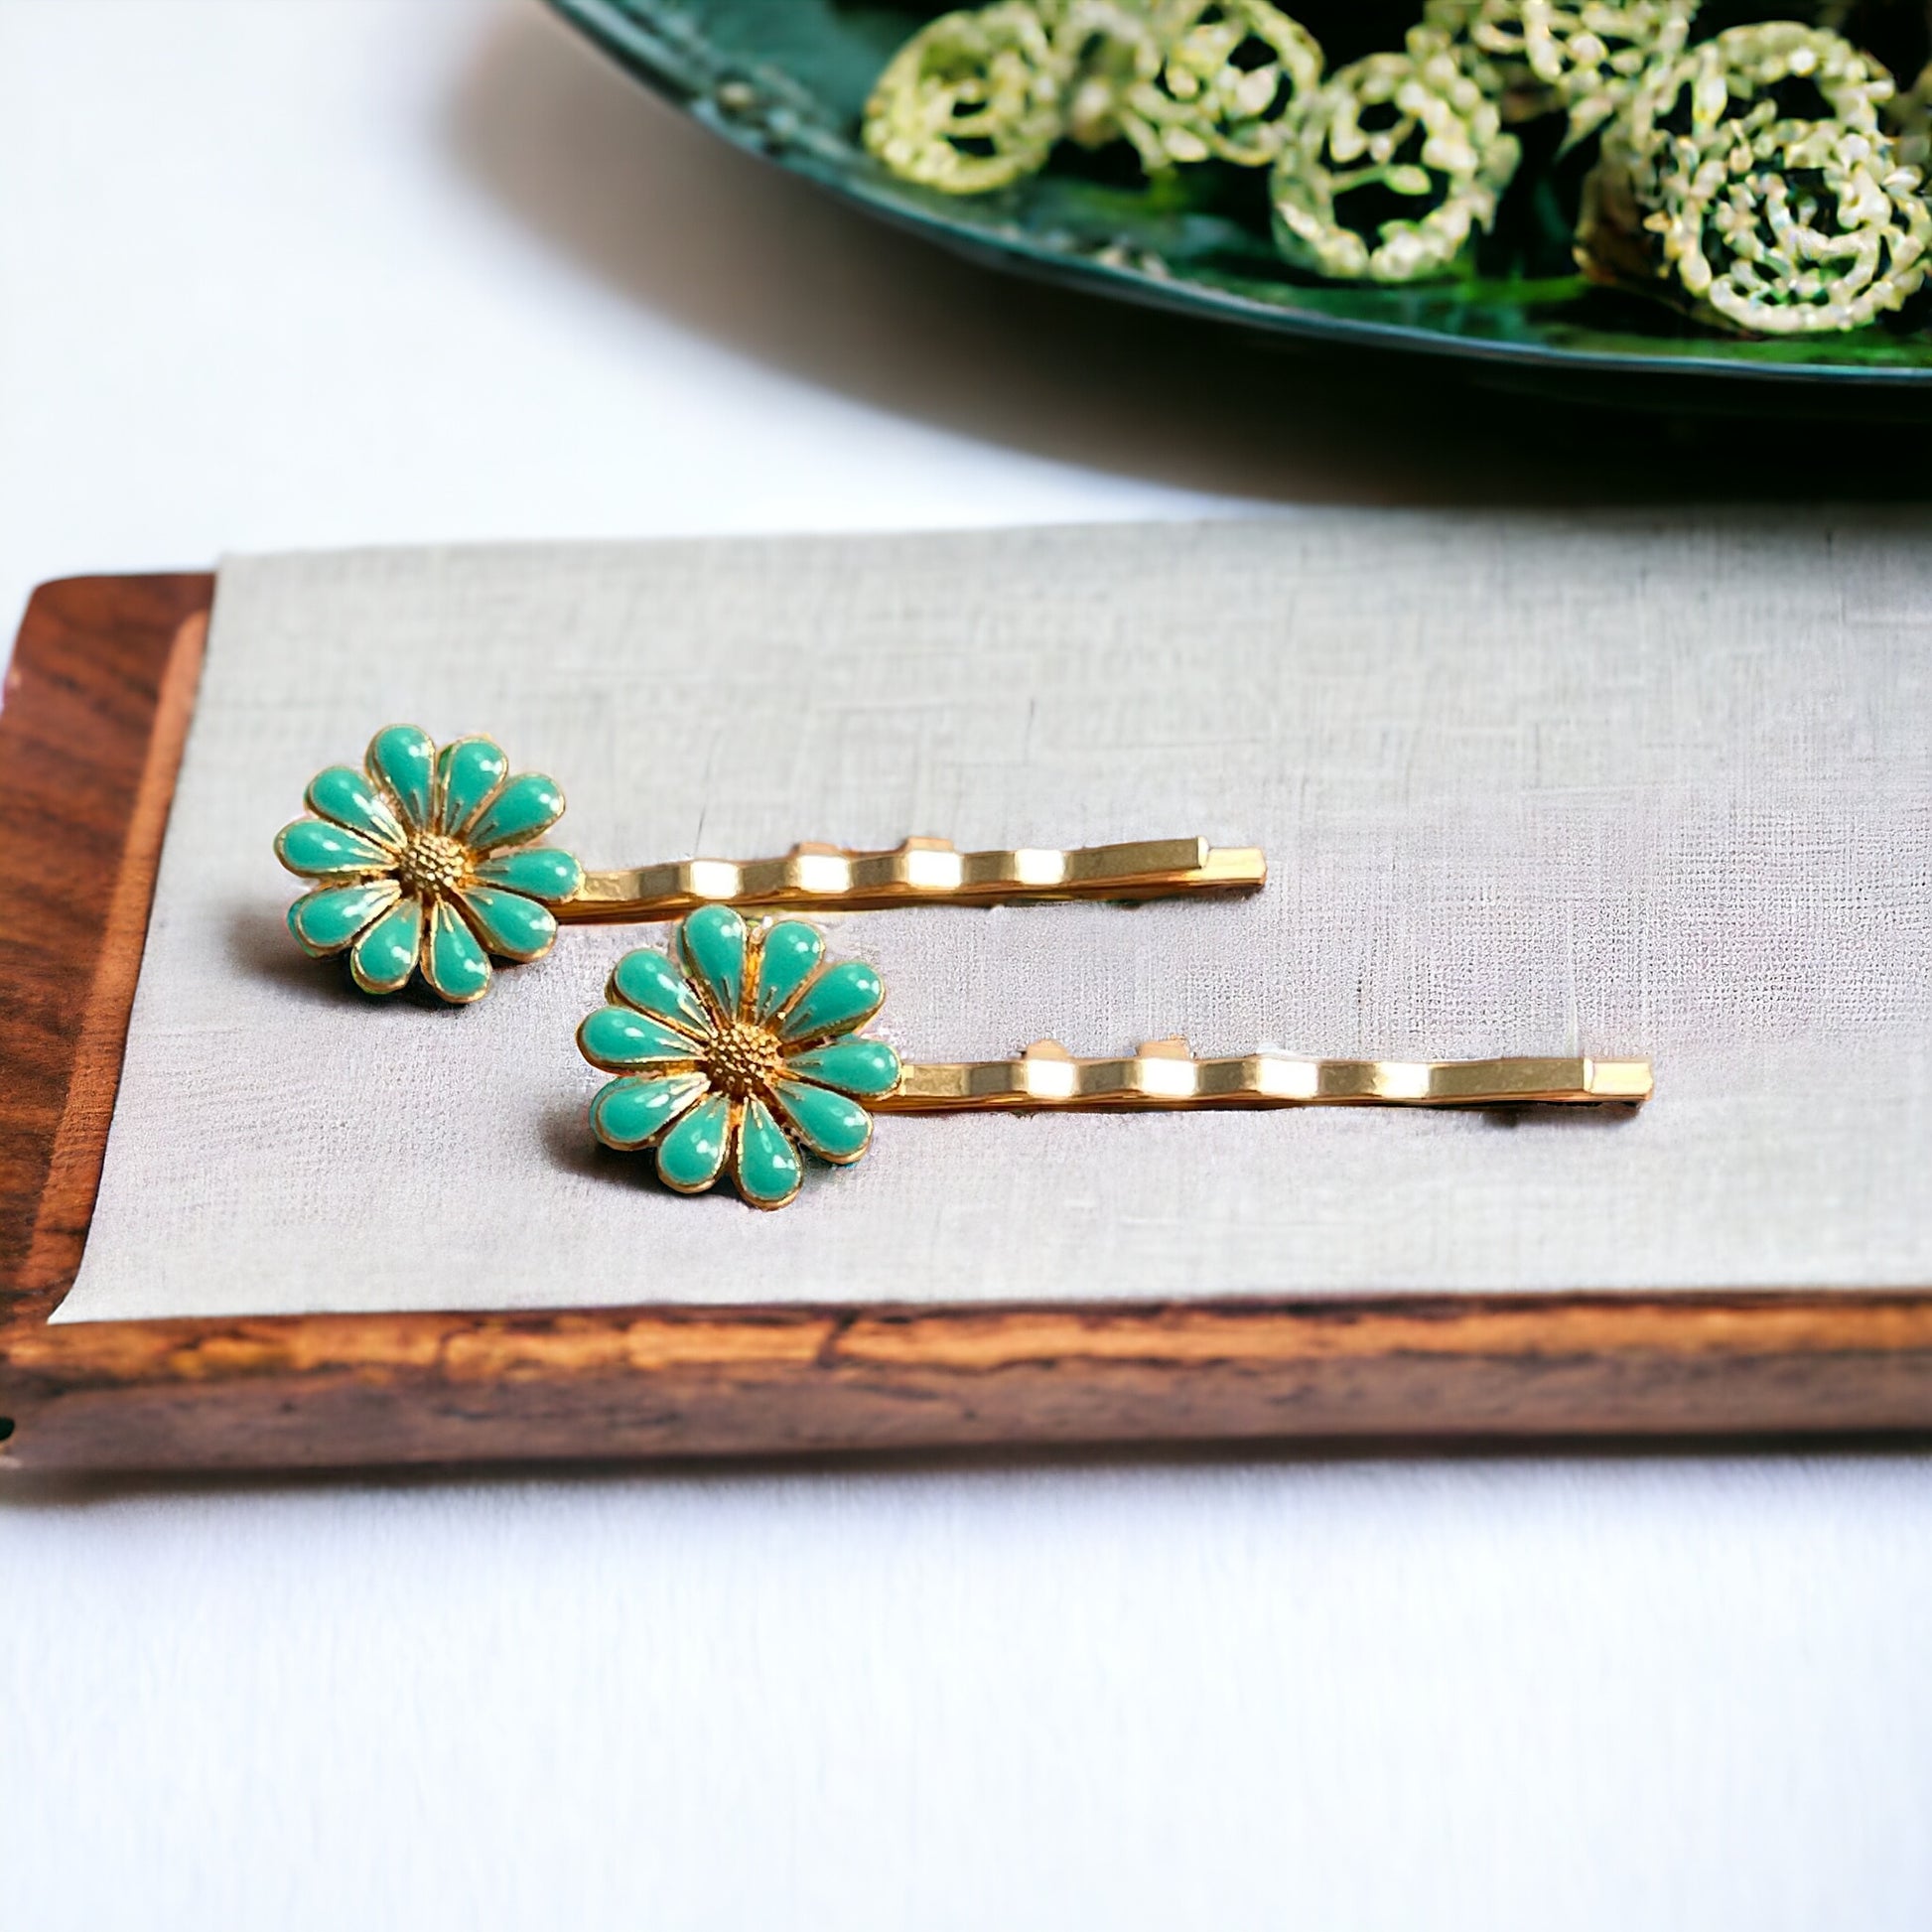 Decorative Mint Green Enamel Wildflower Hair Pins - Delicate Floral Accessories